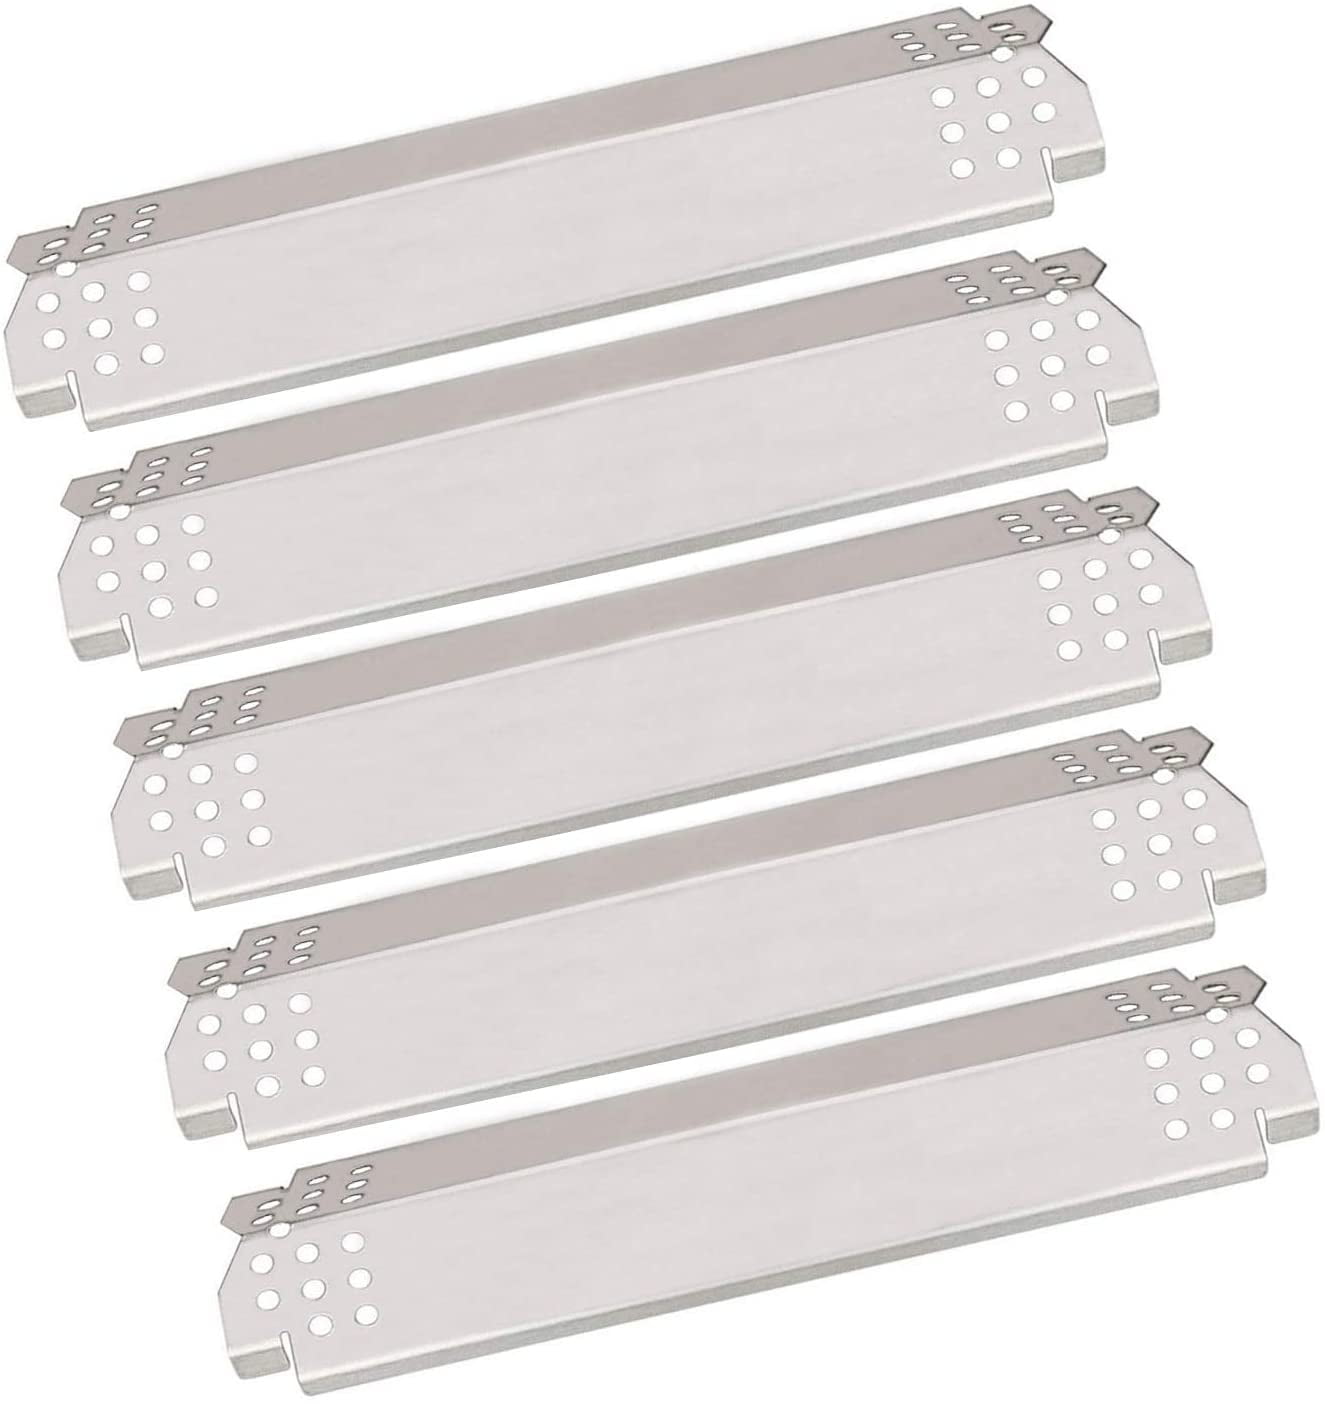 Nexgrill 720-0825 Stainless Burners Stainless Heat Plates Replacement Kit 